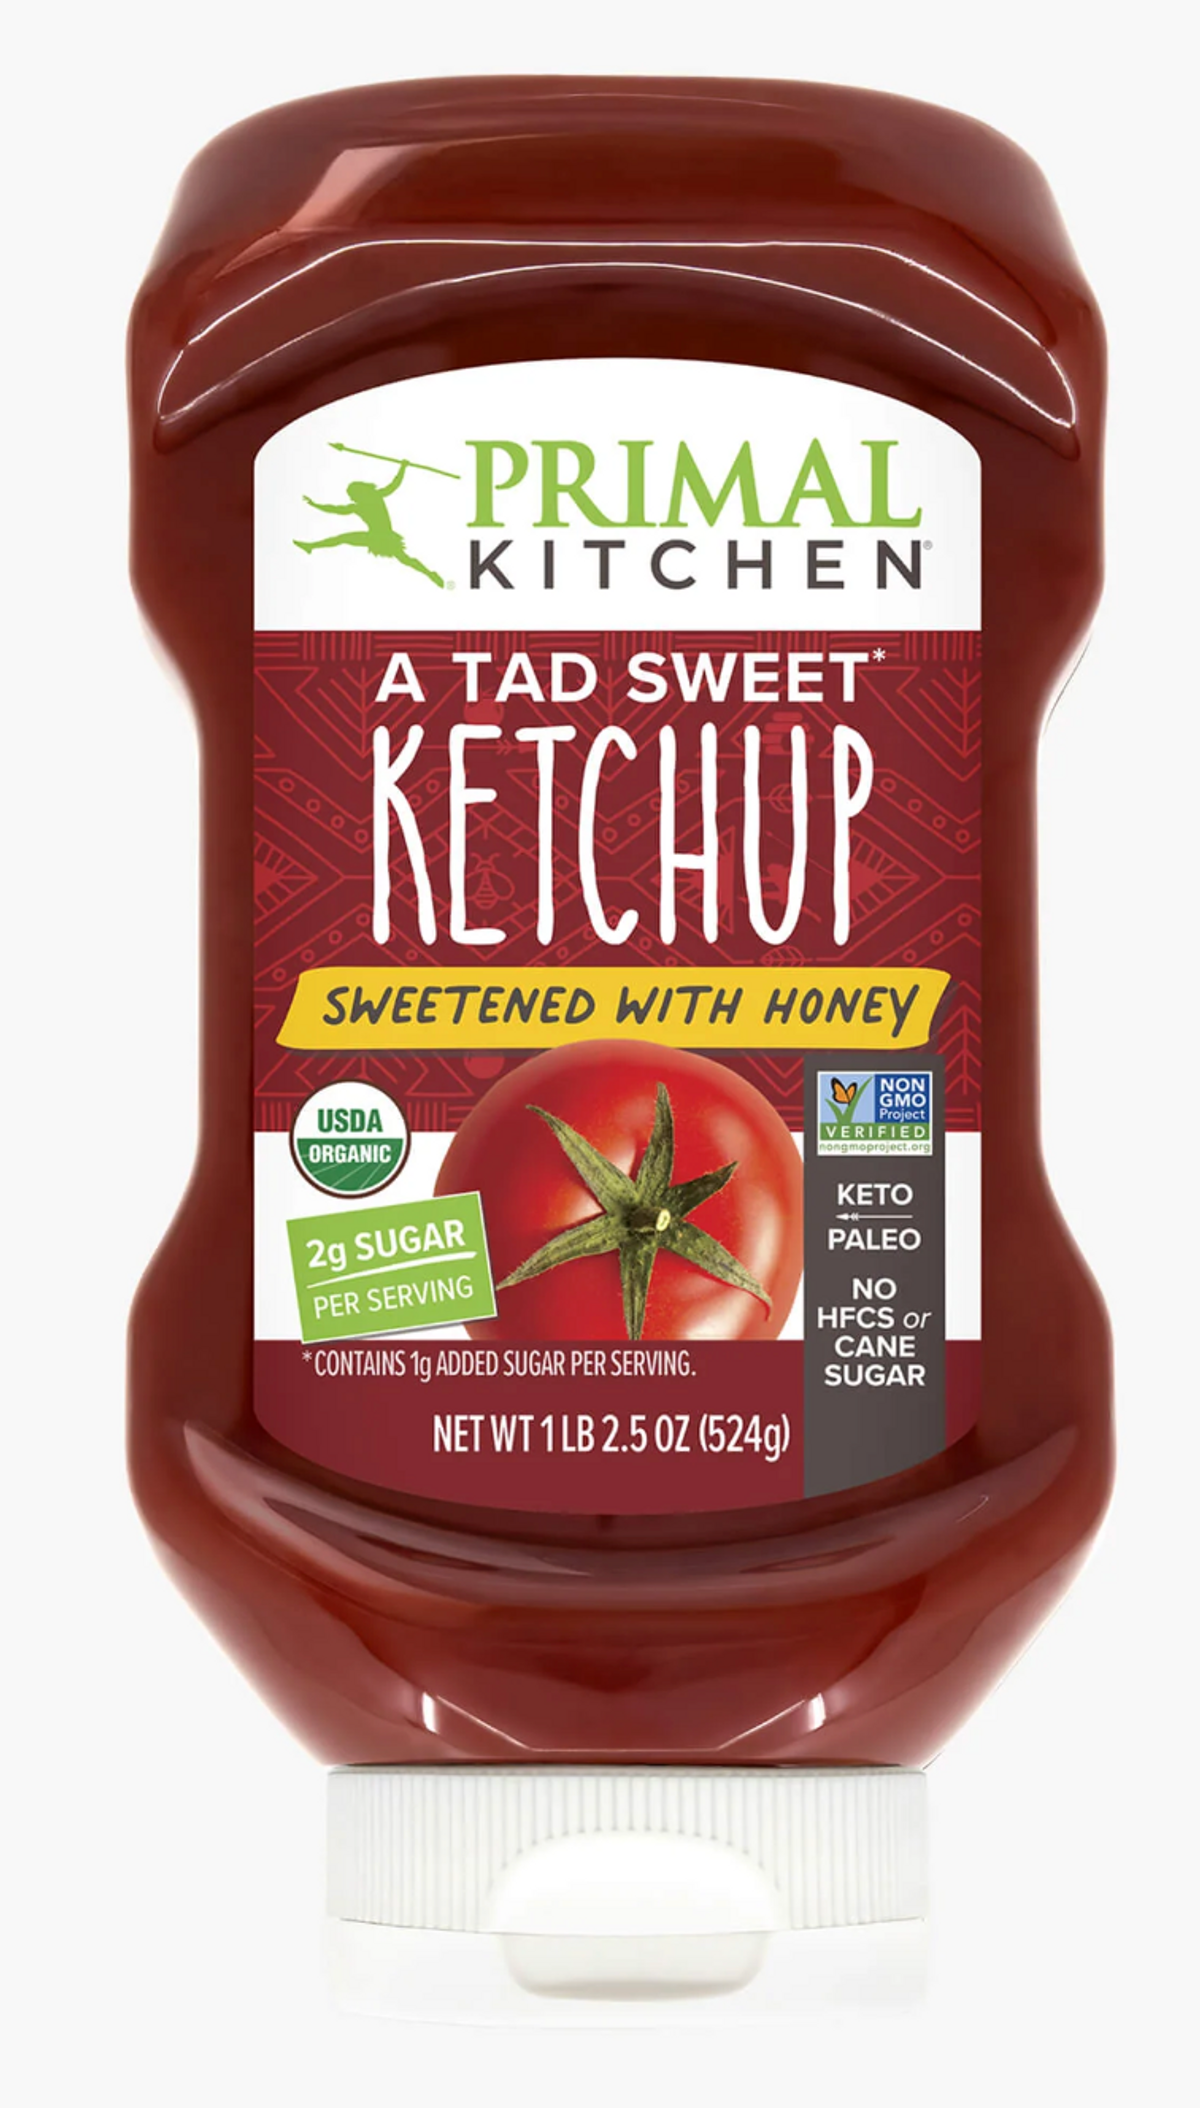  Primal Kitchen A Tad Sweet Ketchup Sweetened with